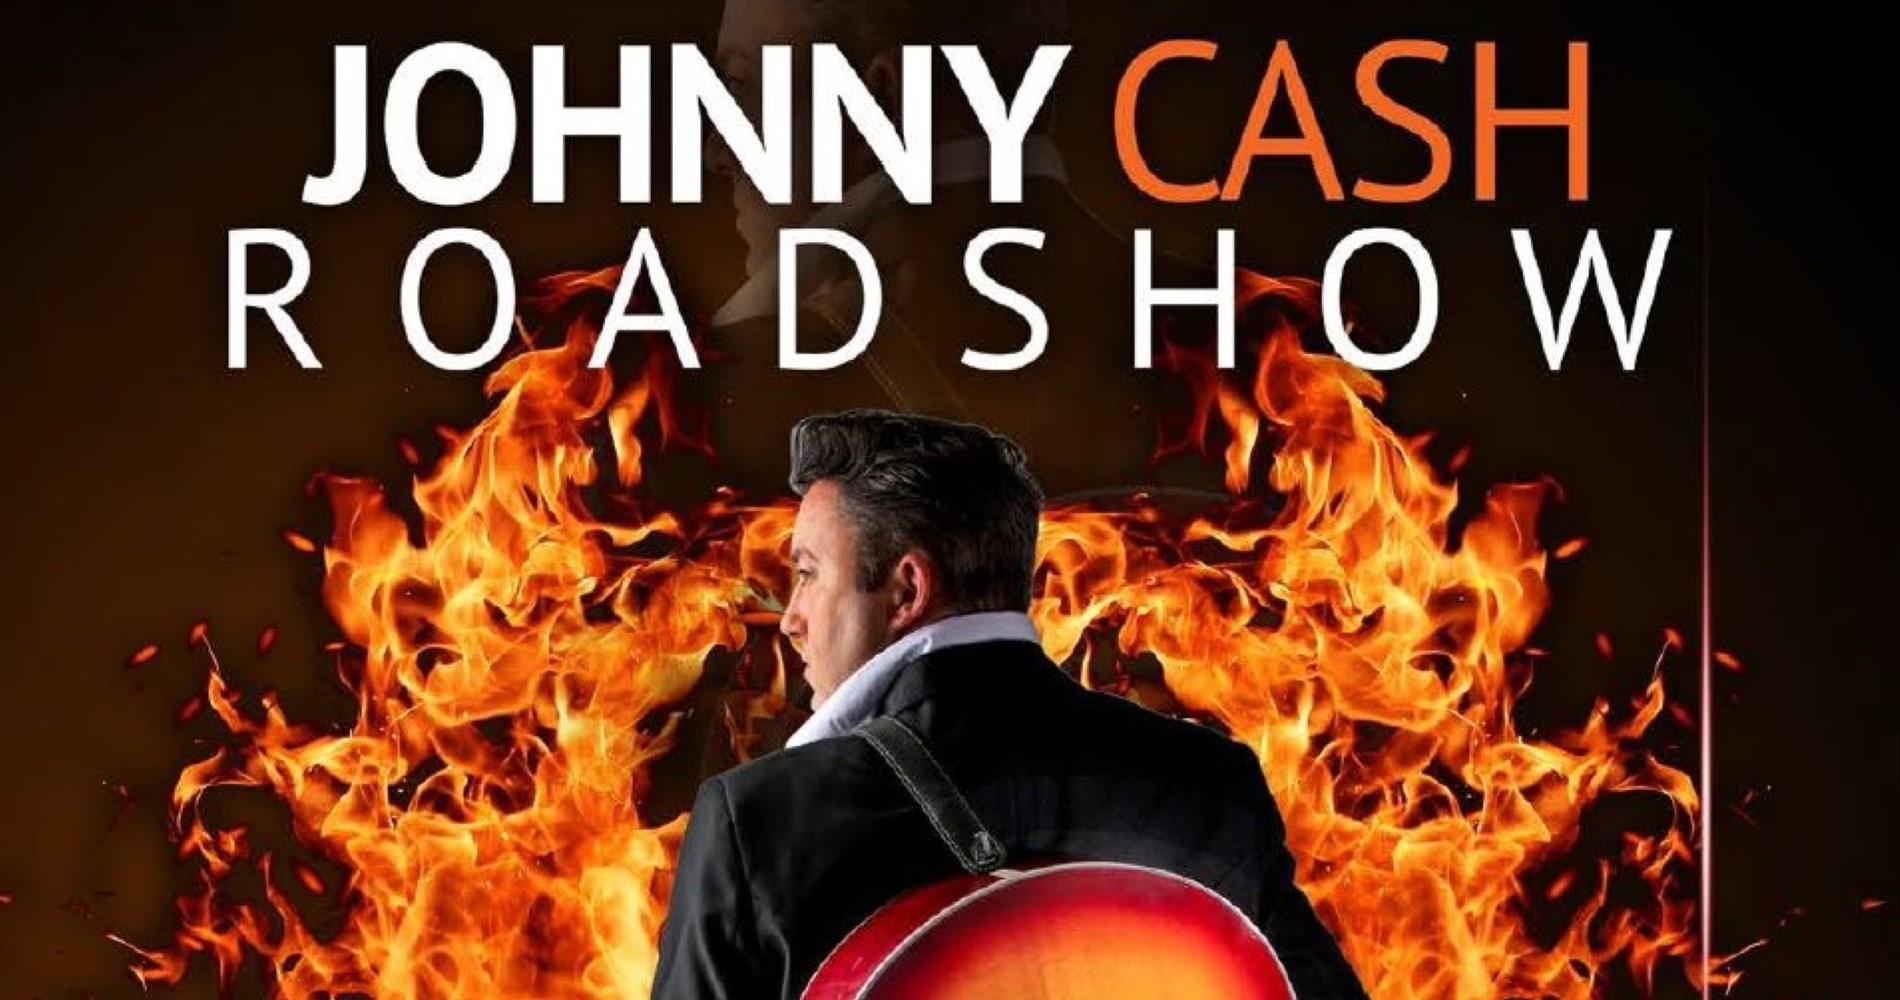 Johnny Cash and his flaming guitar